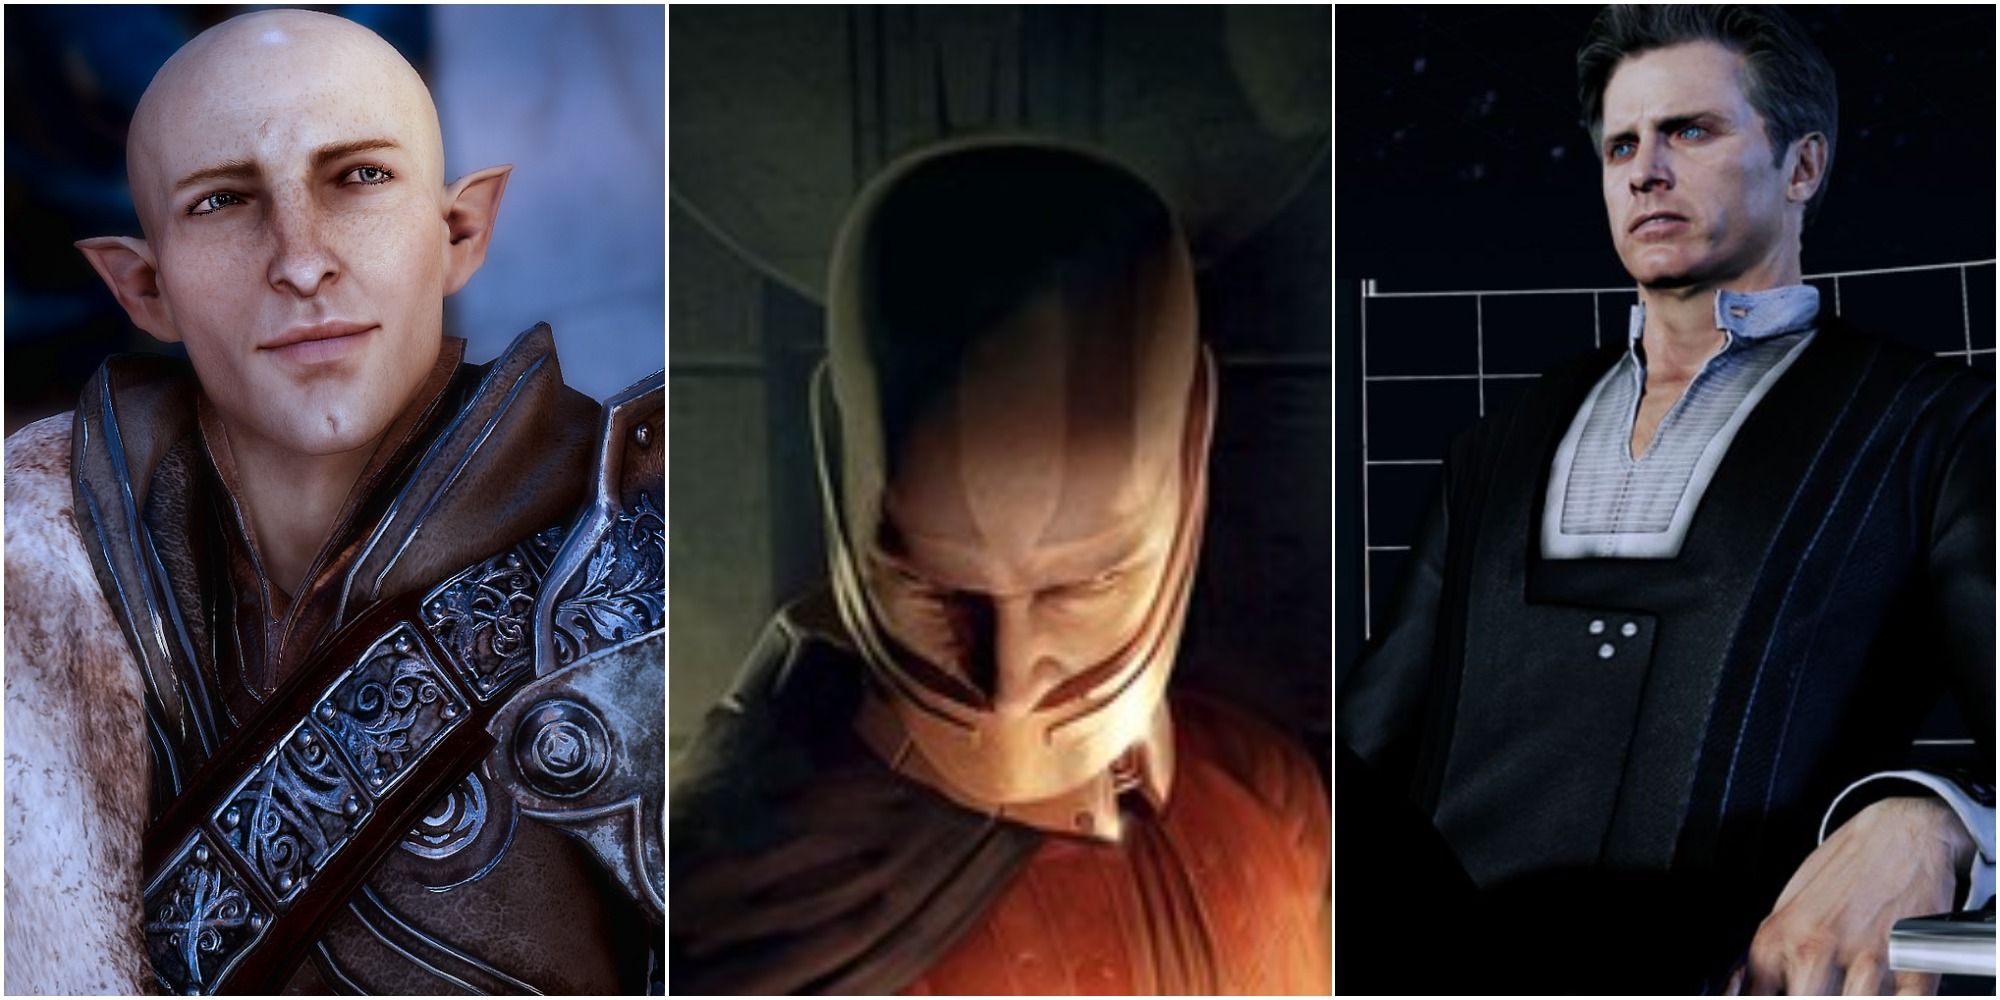 From left to right: Solas from Dragon Age, Darth Malak from Star Wars and the Illusive Man from Mass Effect. All villains created by game developer BioWare